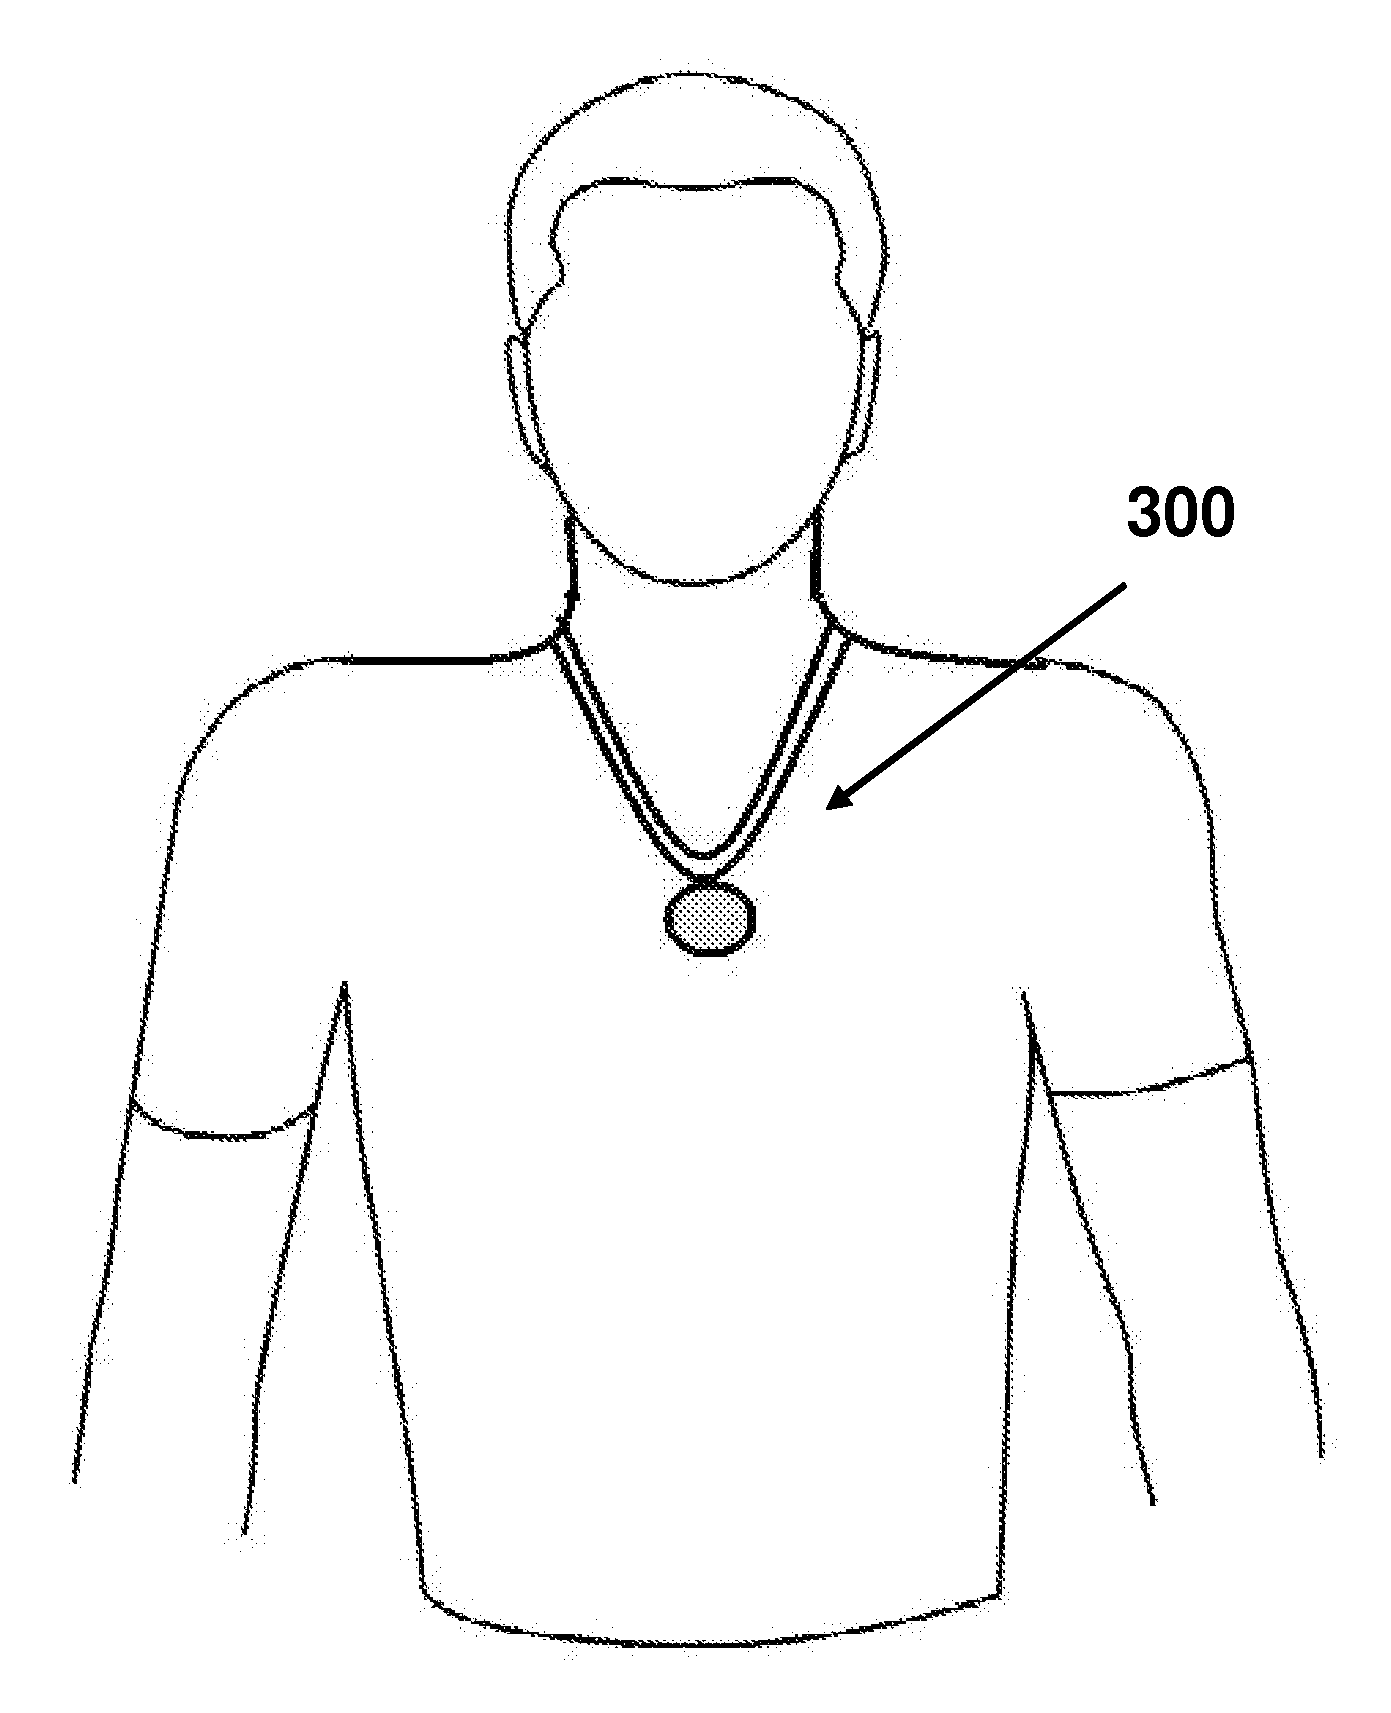 Necklace type of detector for electrocardiographic and temperature information